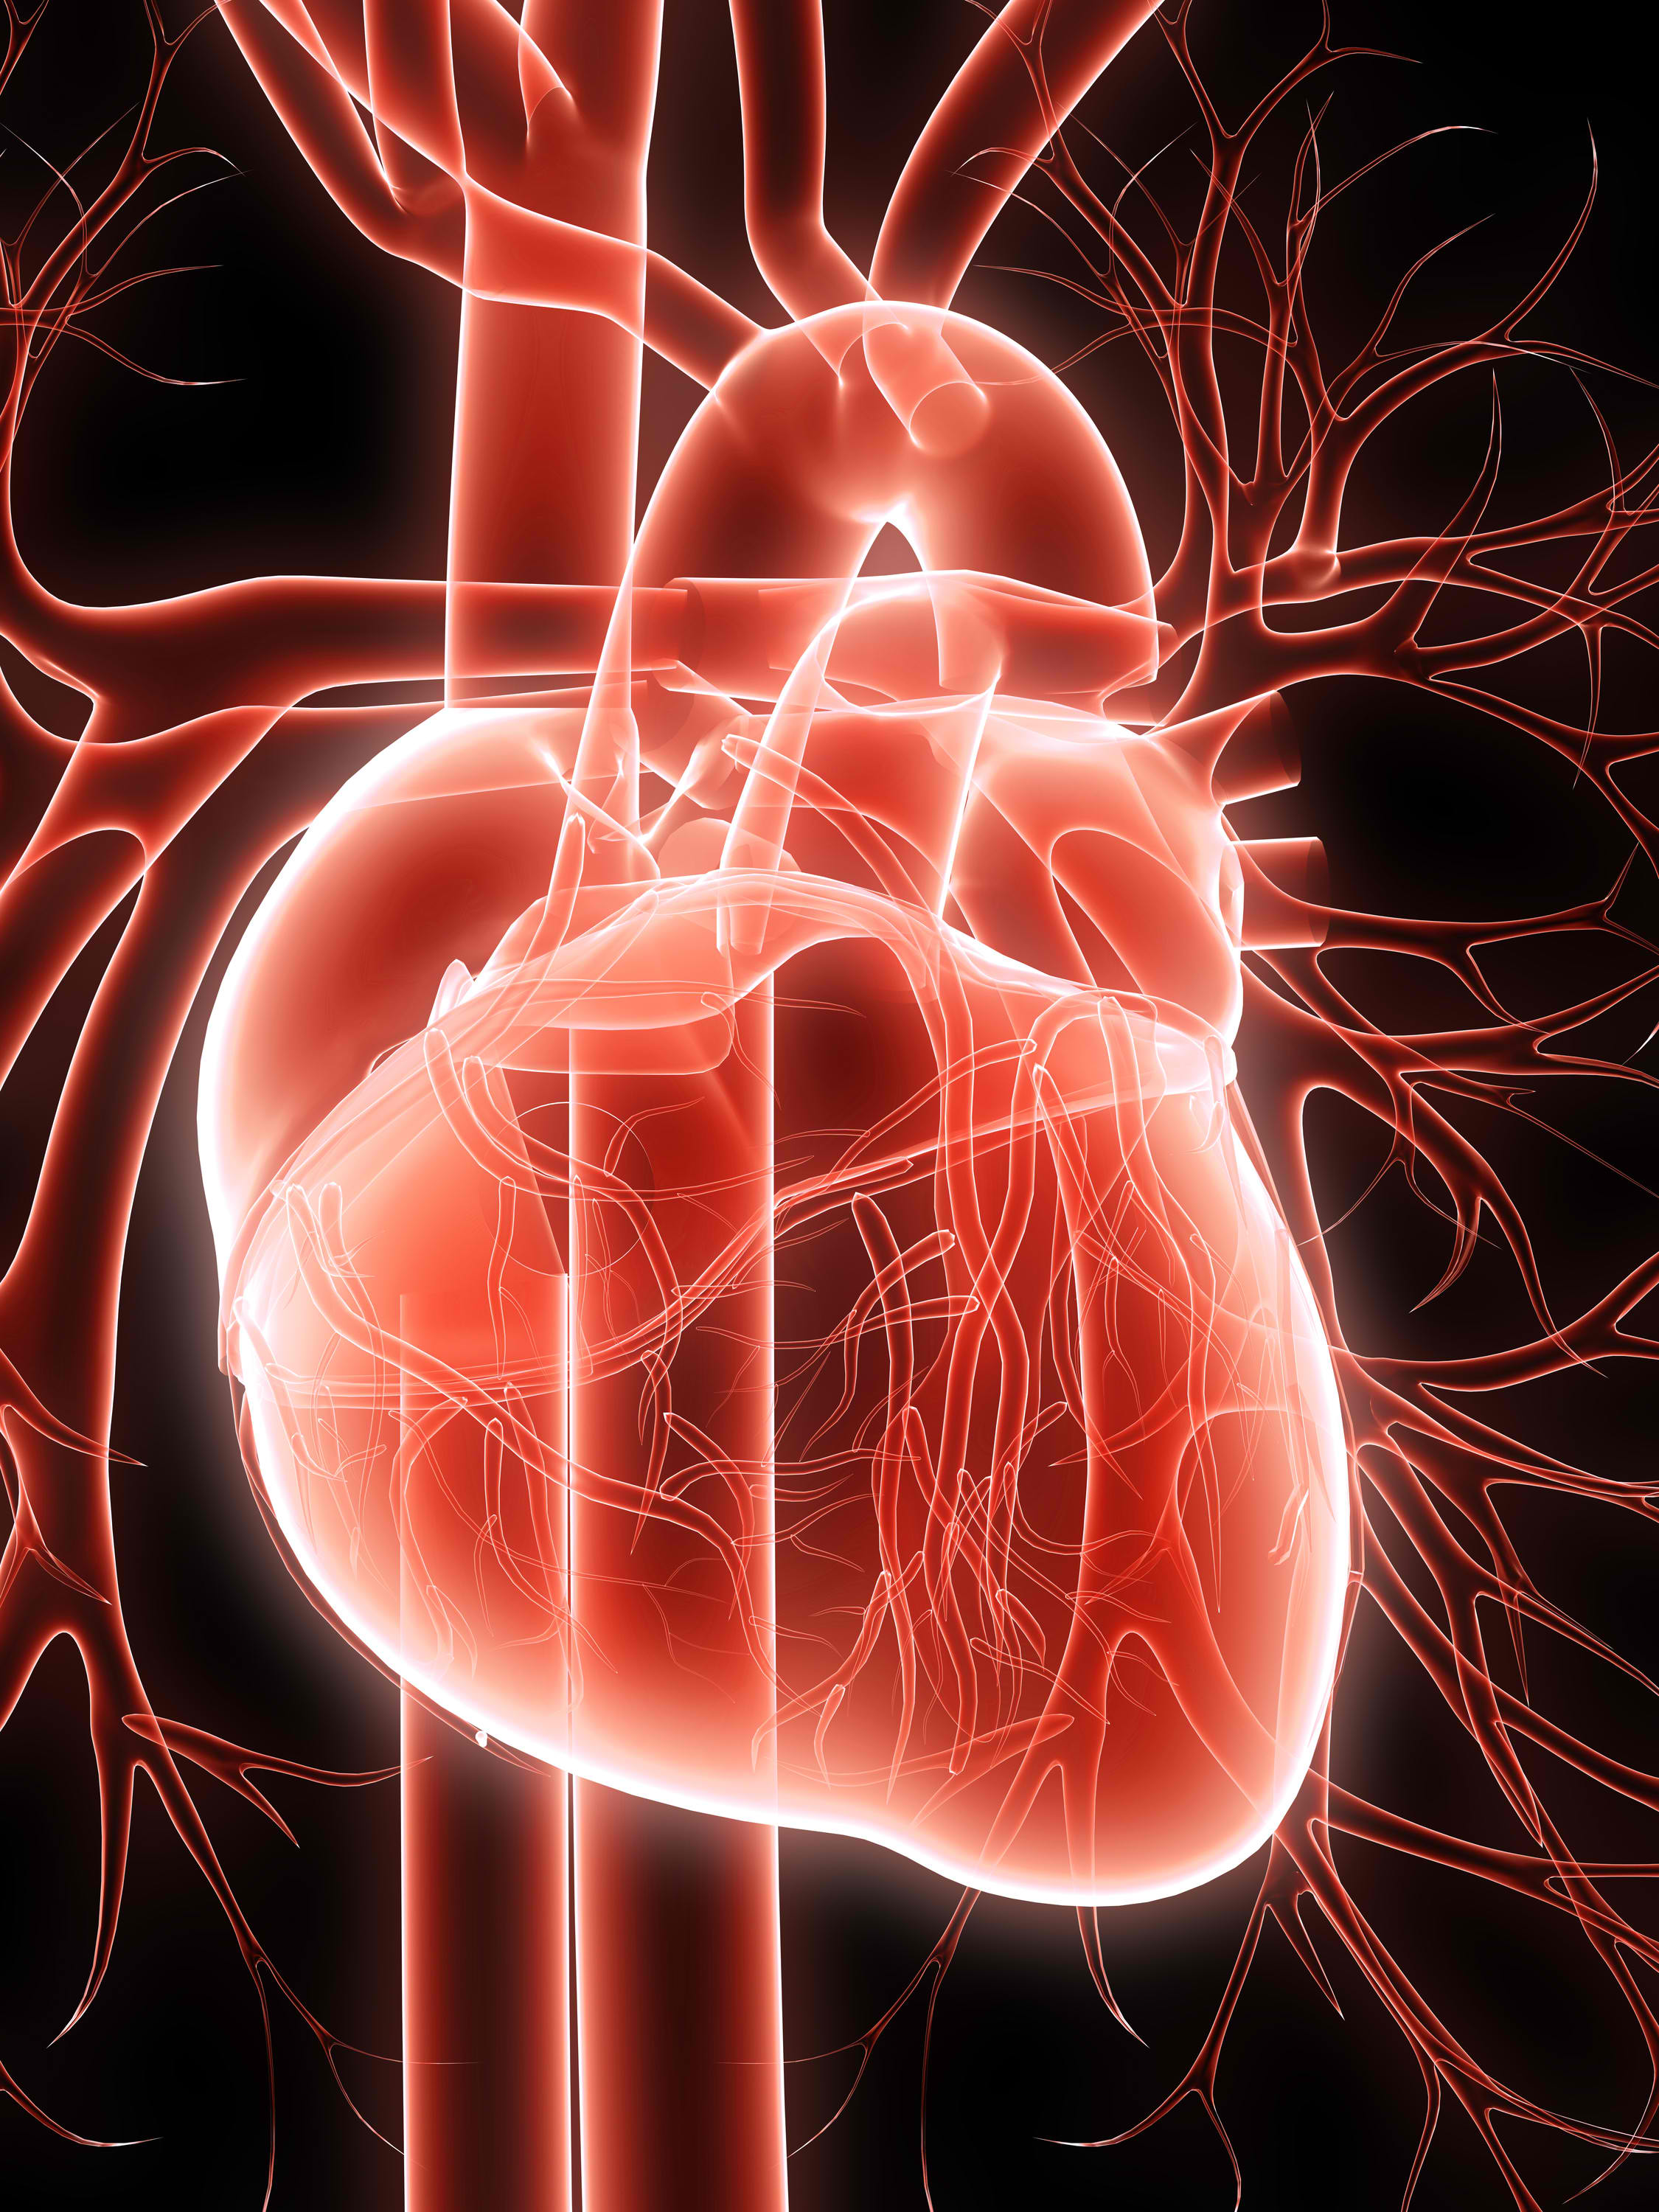 heart images hd biology - Clip Art Library